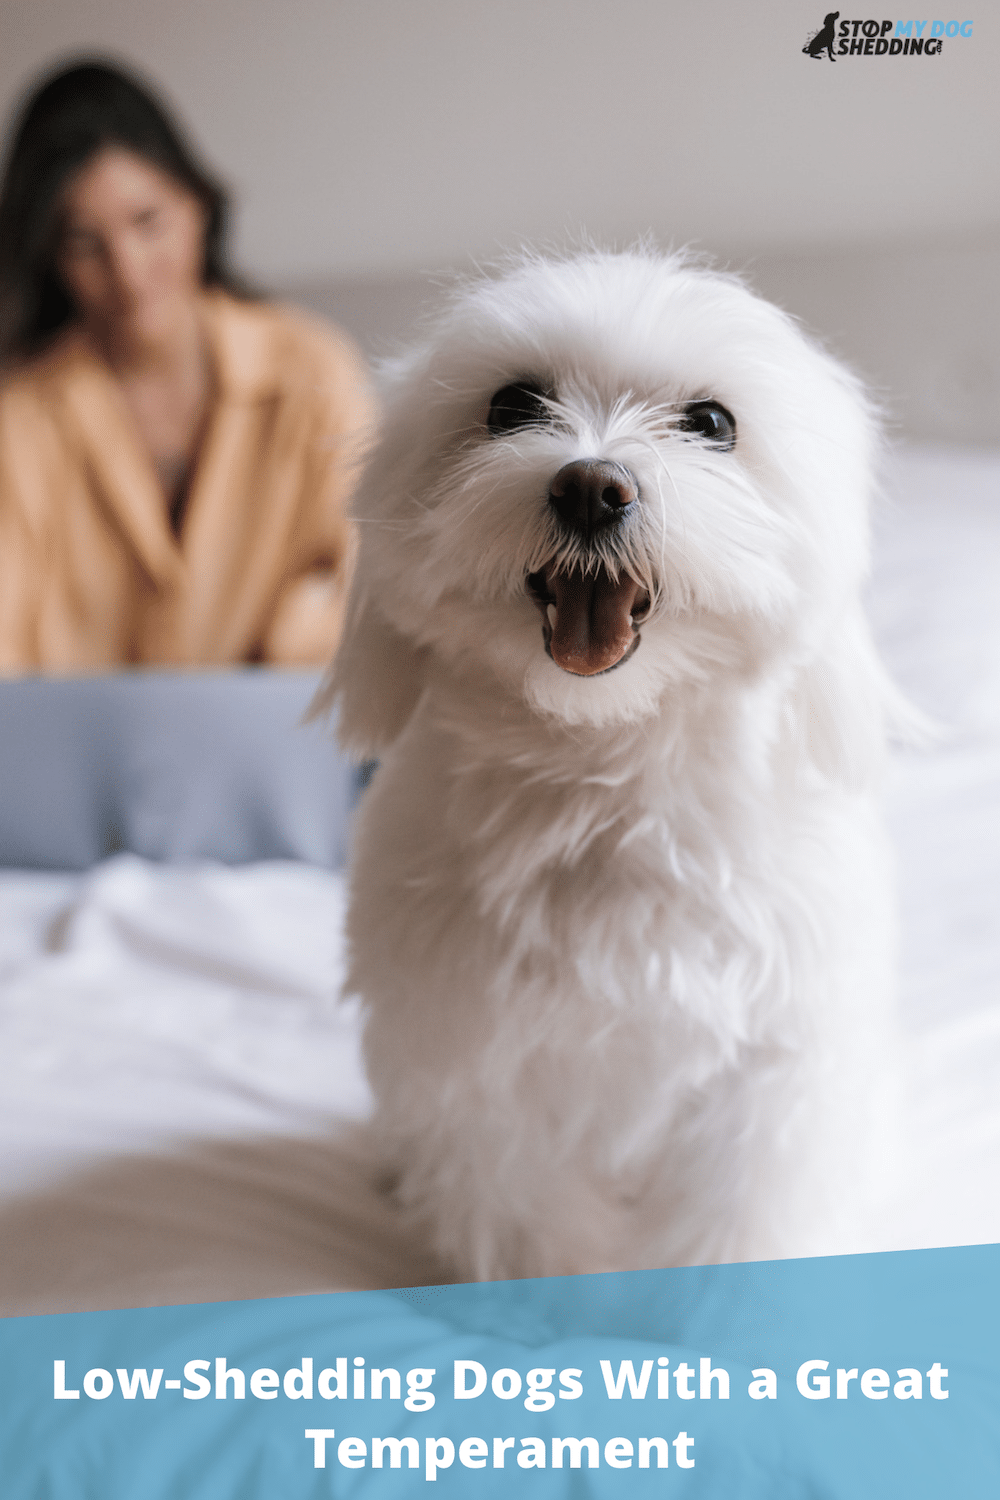 9 Low-Shedding Dogs With Good Temperaments